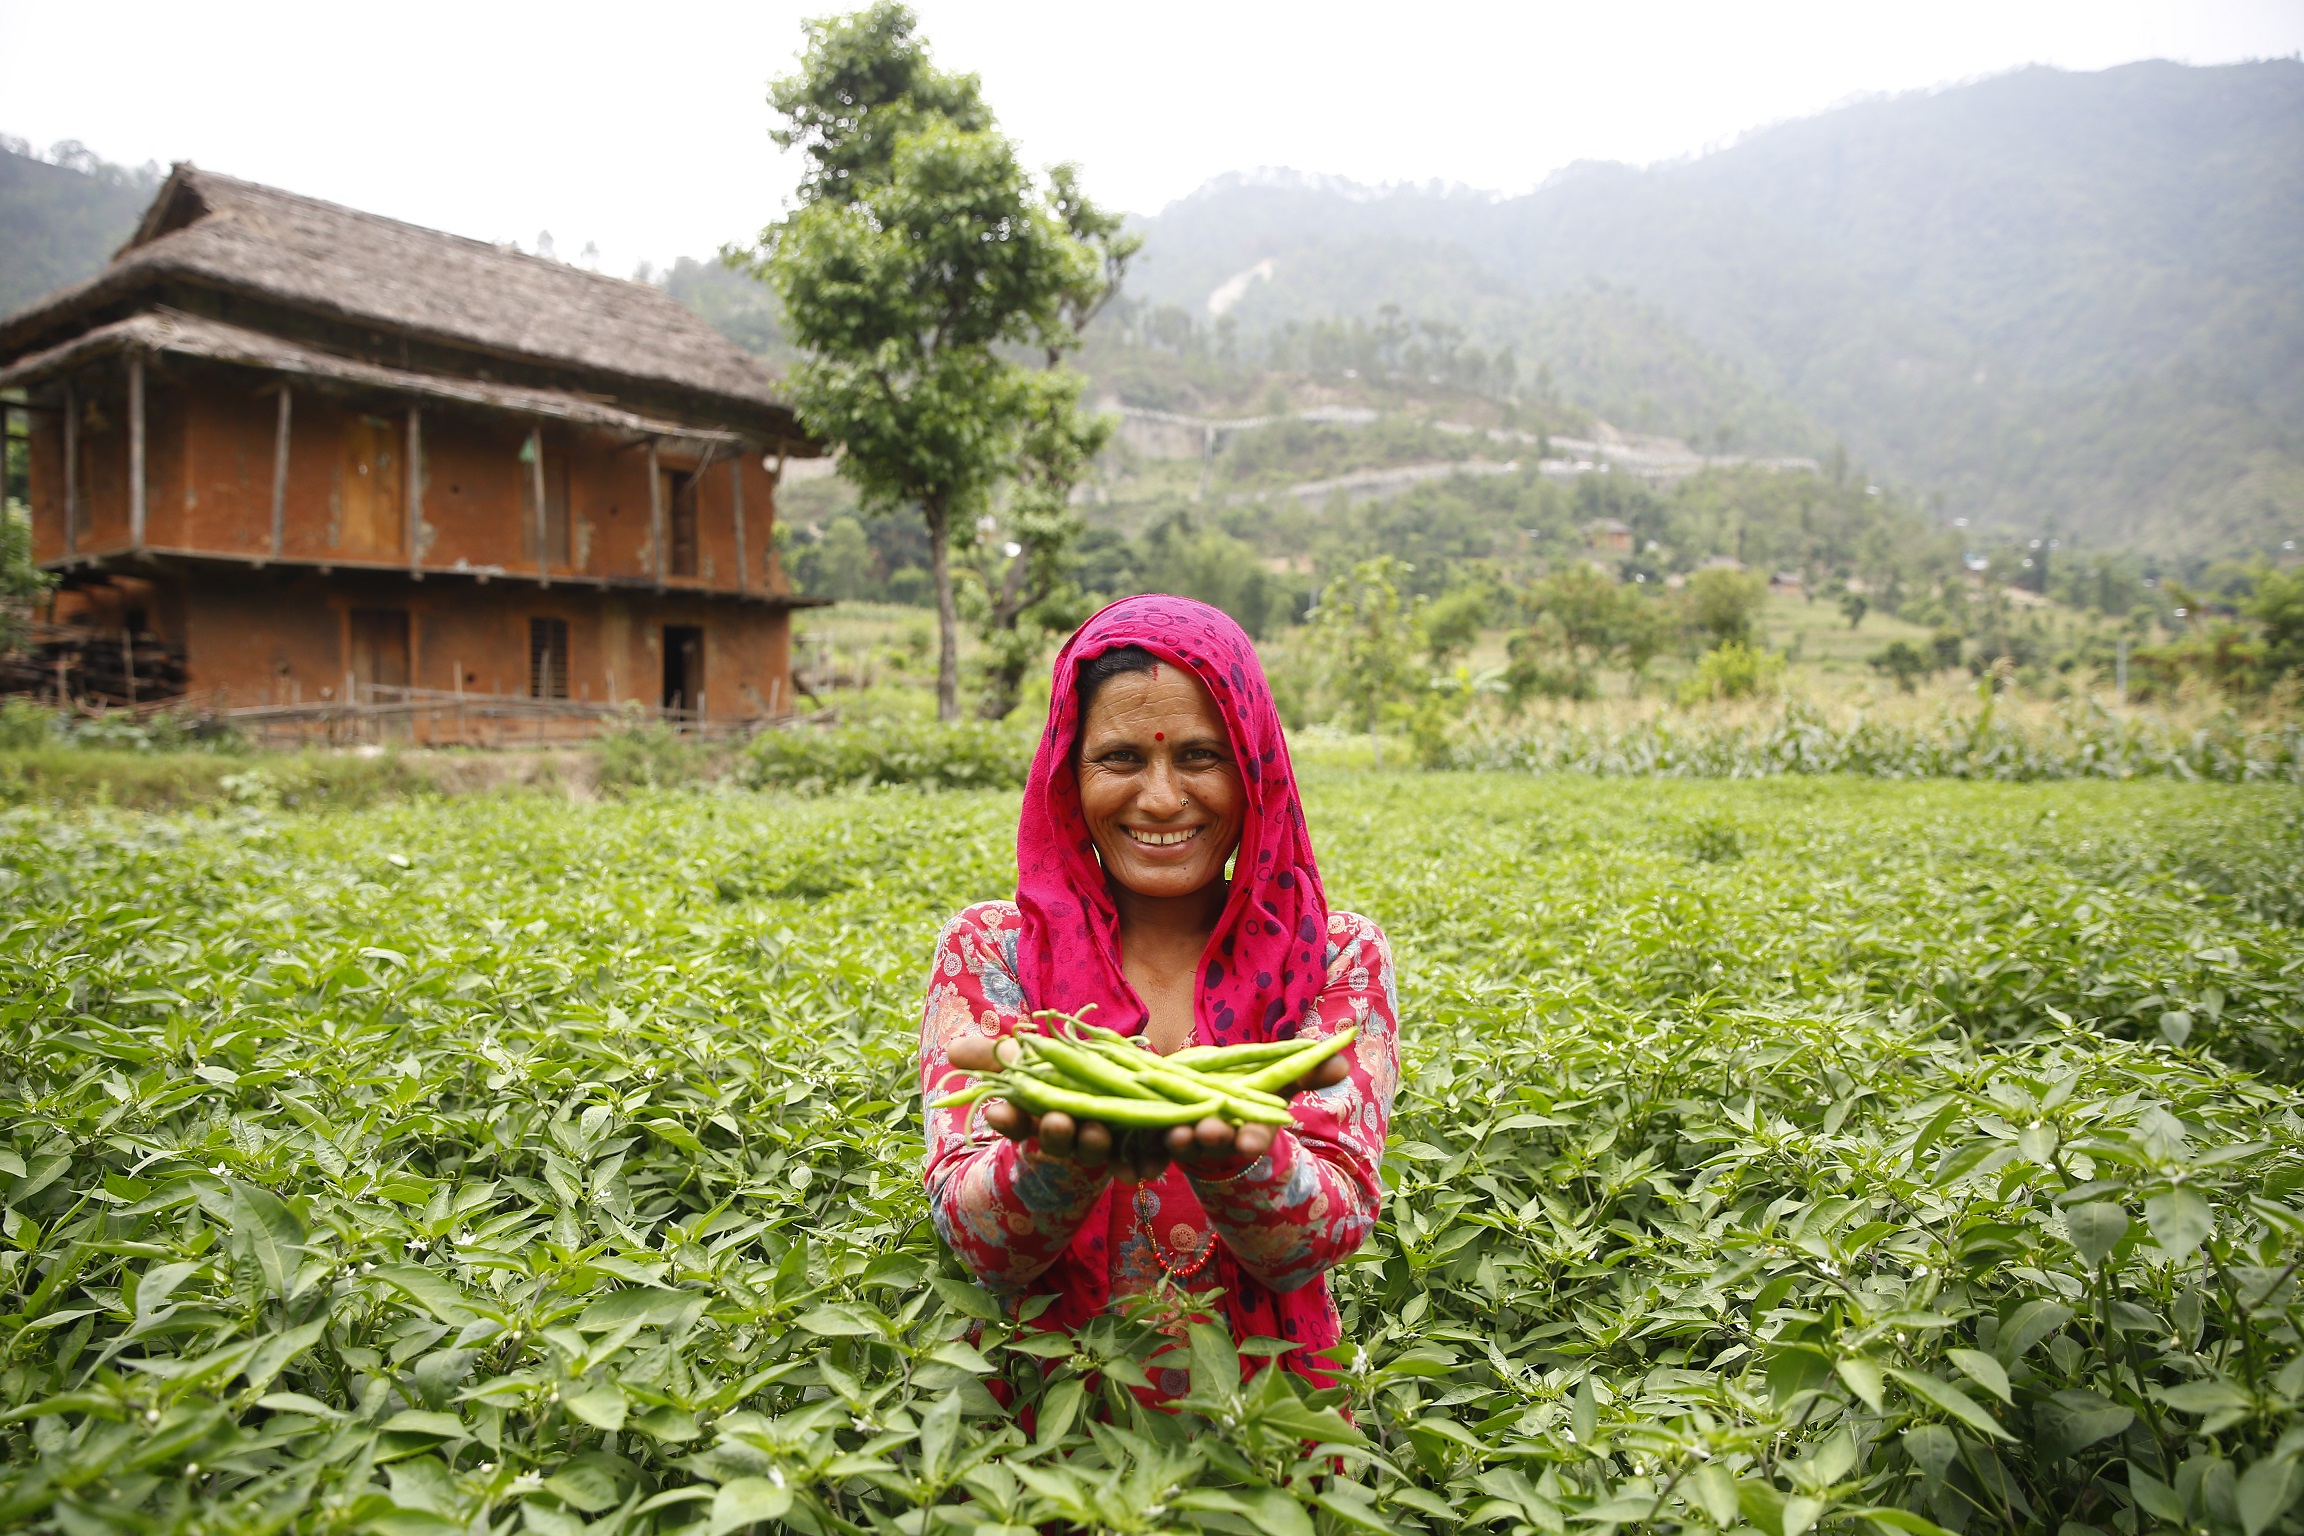 Sweden strengthens partnership to accelerate economic empowerment for rural women